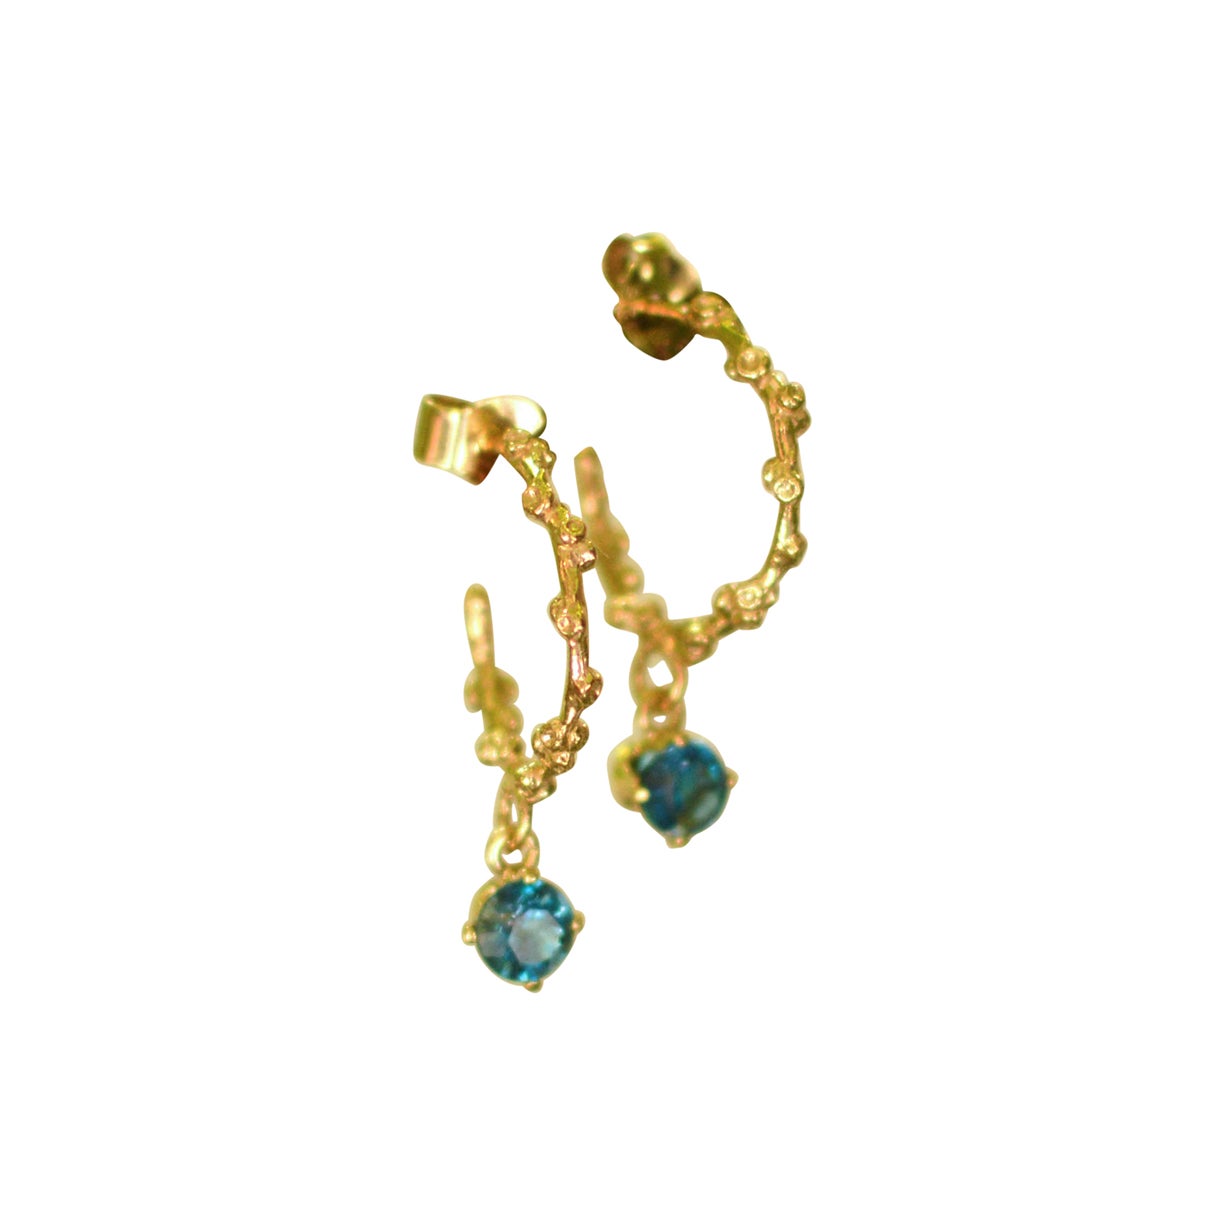 Solid 18 Carat Gold Barnacle Topaz Earrings By Lucy Stopes-Roe For Sale